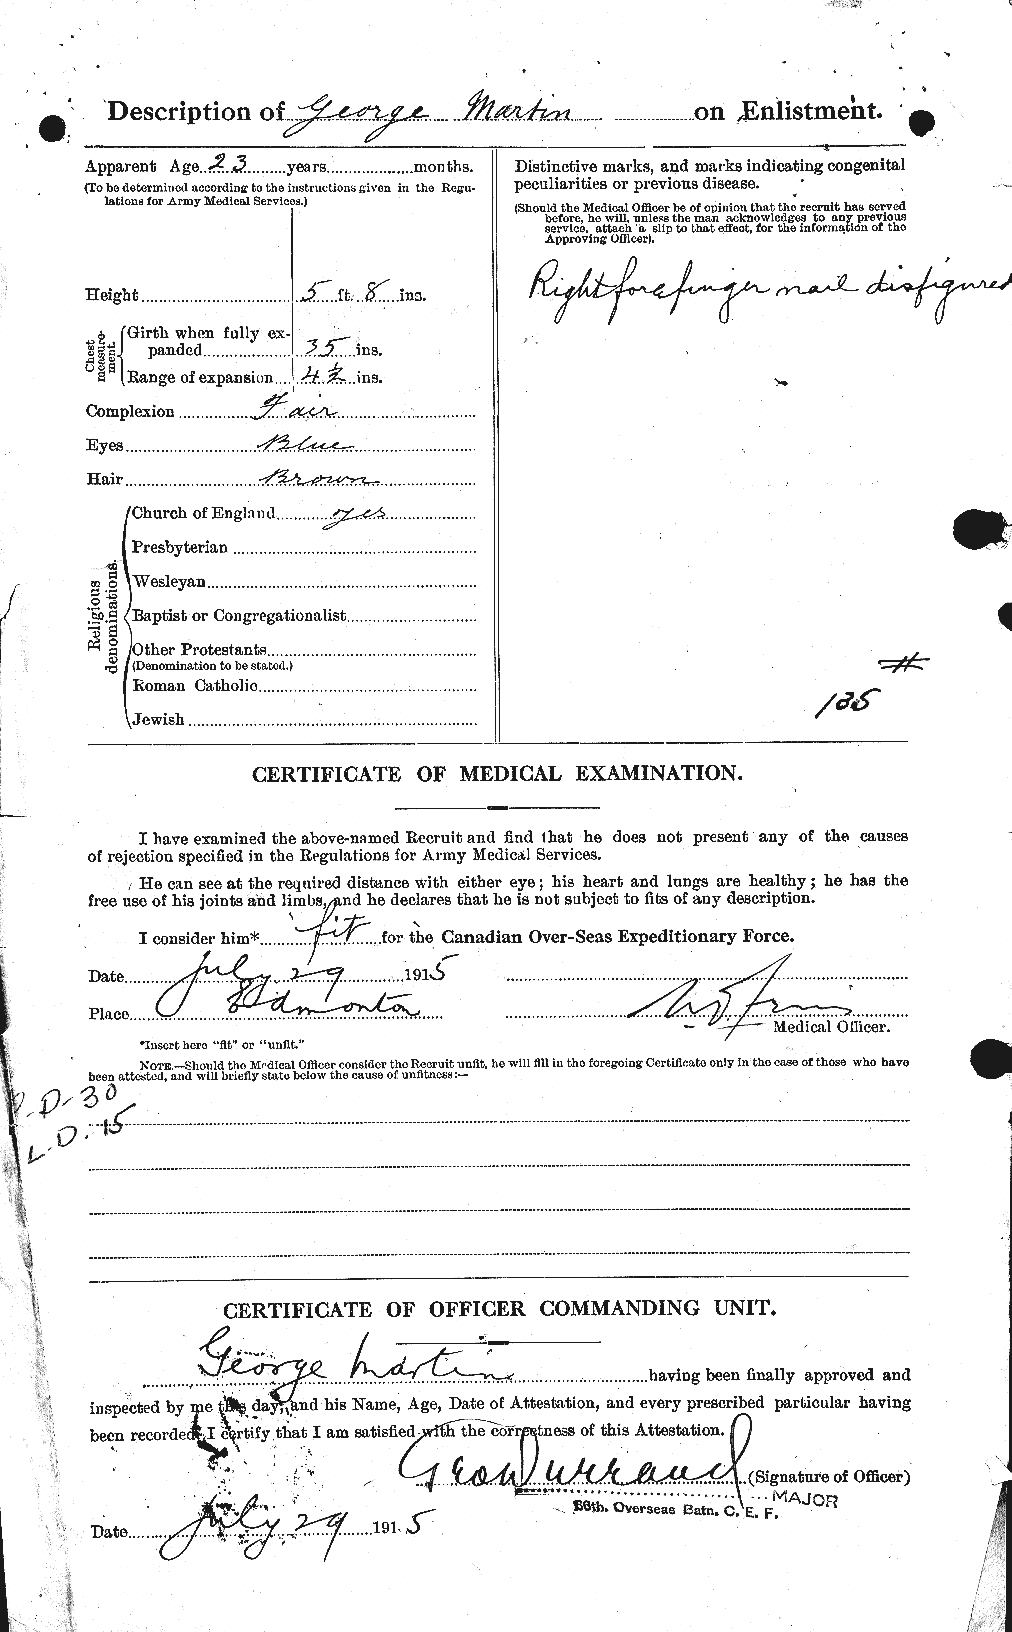 Personnel Records of the First World War - CEF 484956b